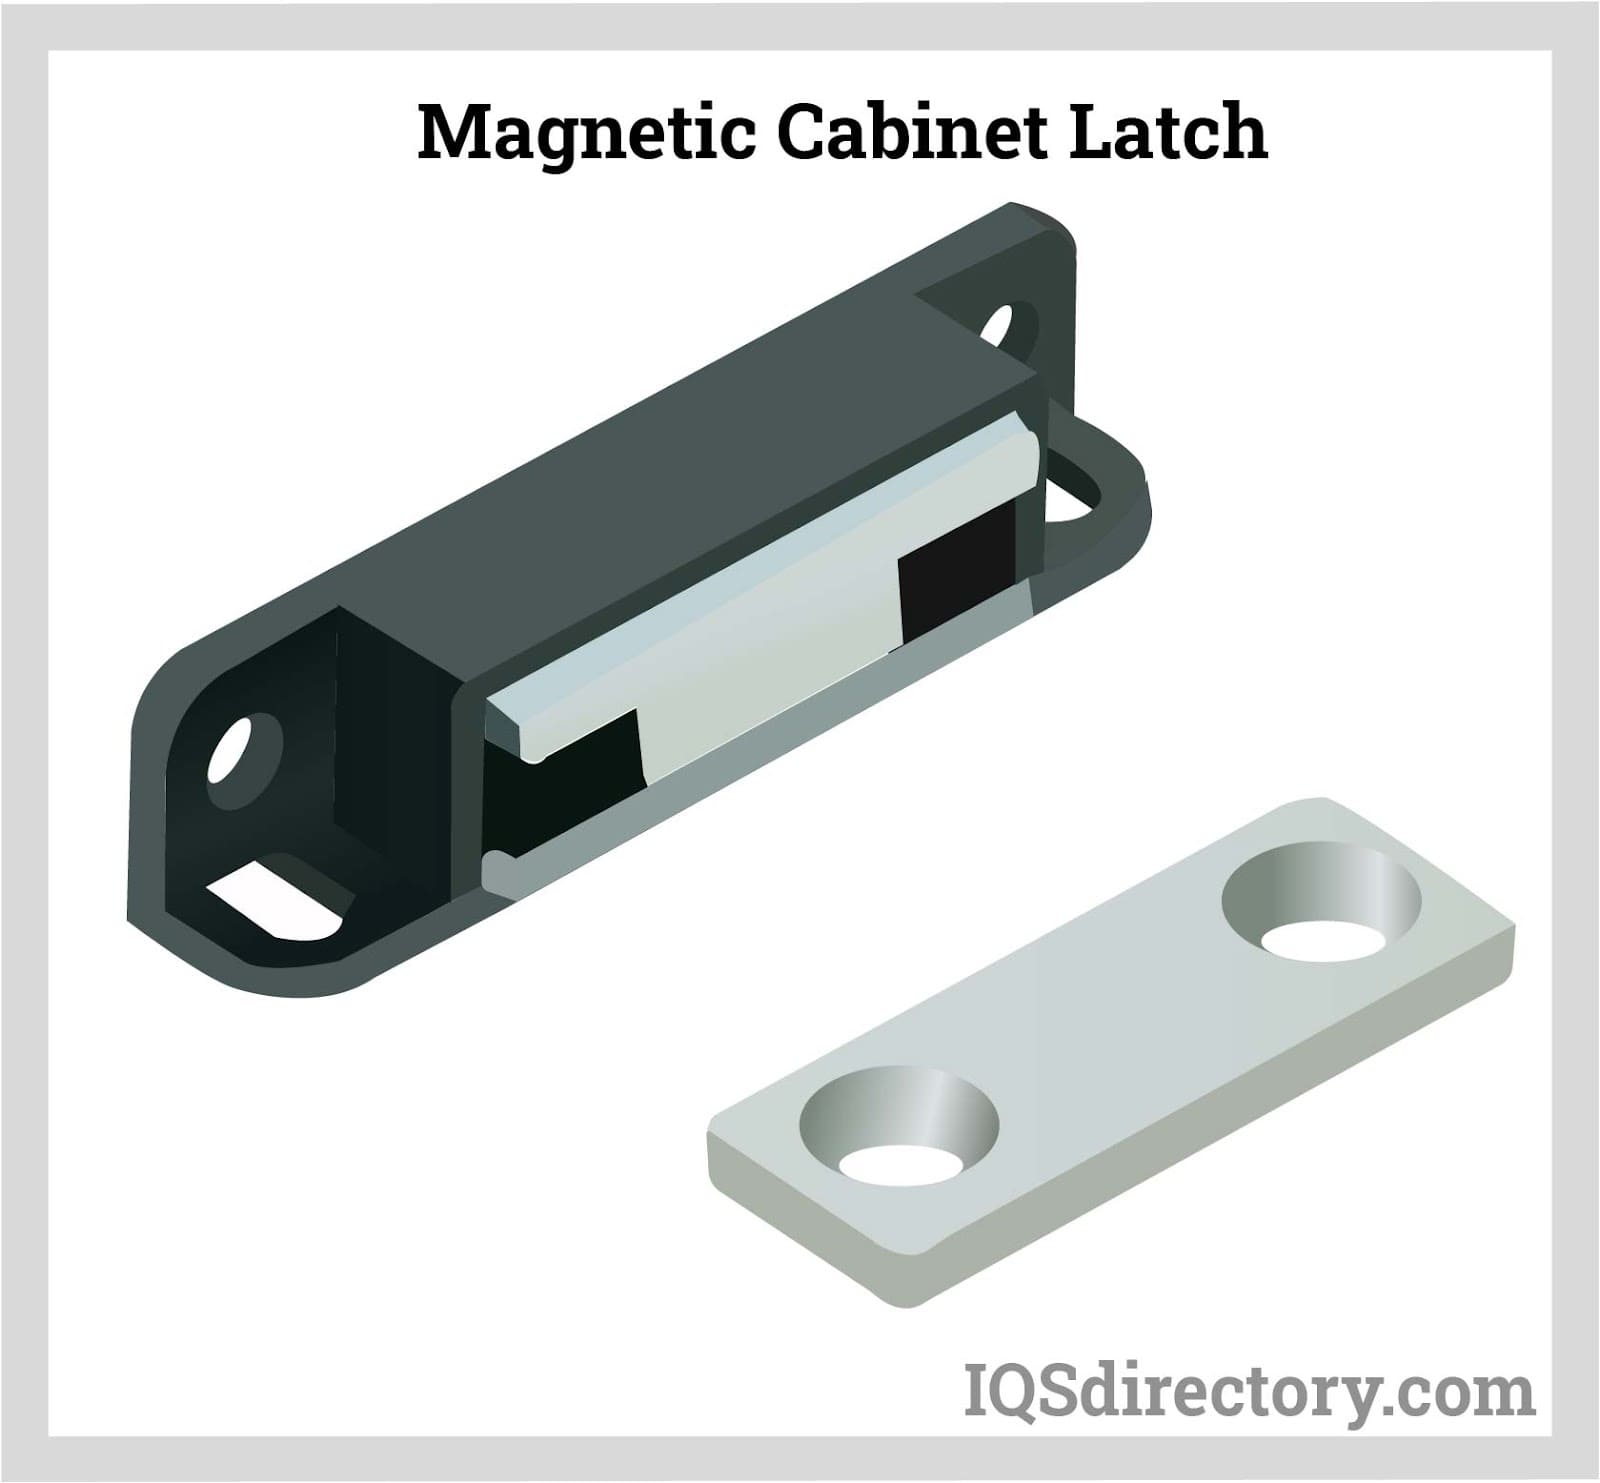 Magnetic Cabinet Latch